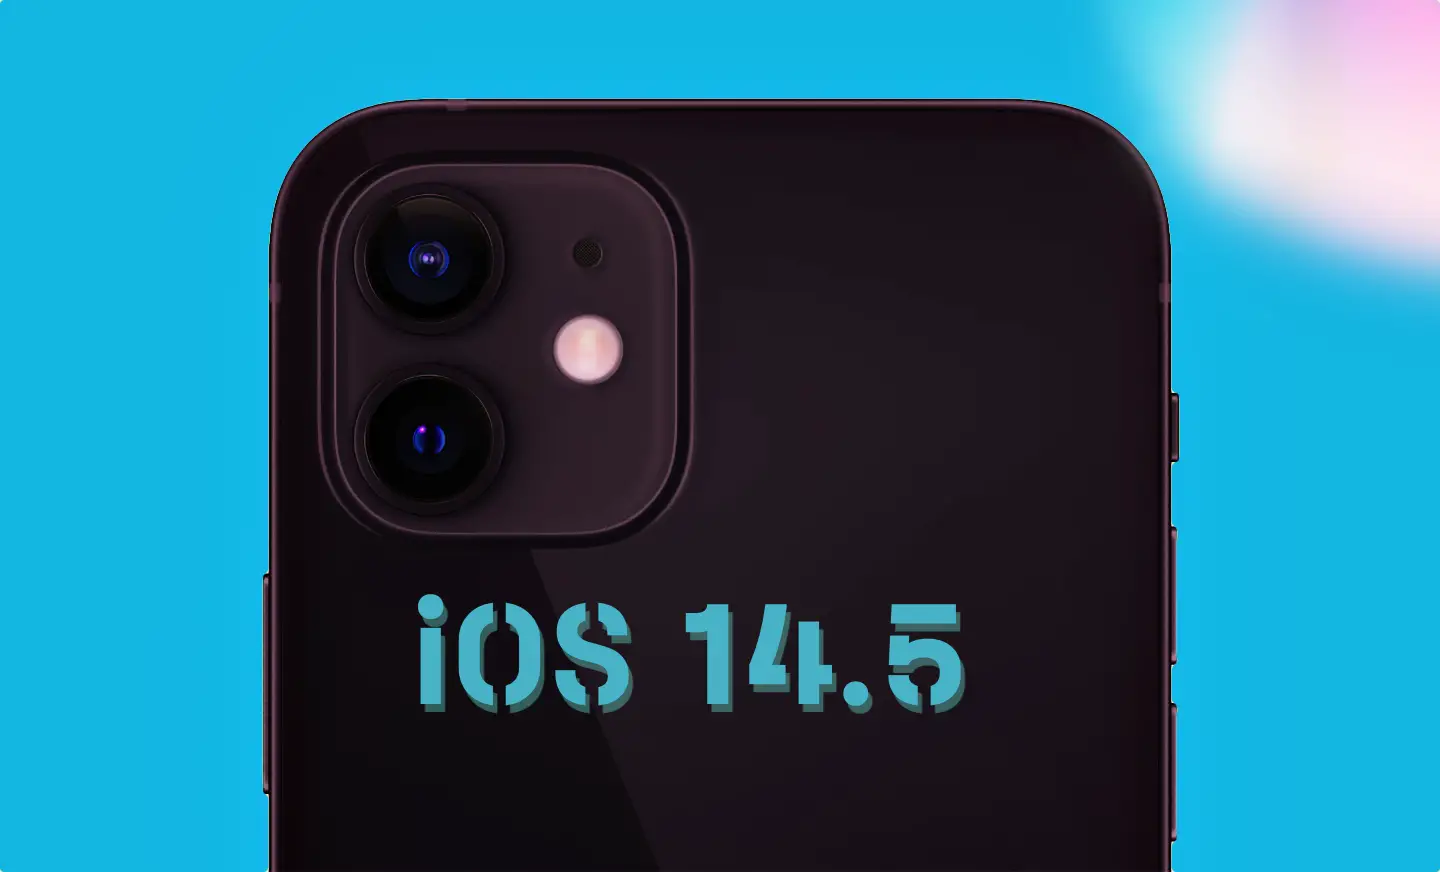 Beta 7 of iOS 14.5 and iPadOS 14.5 released